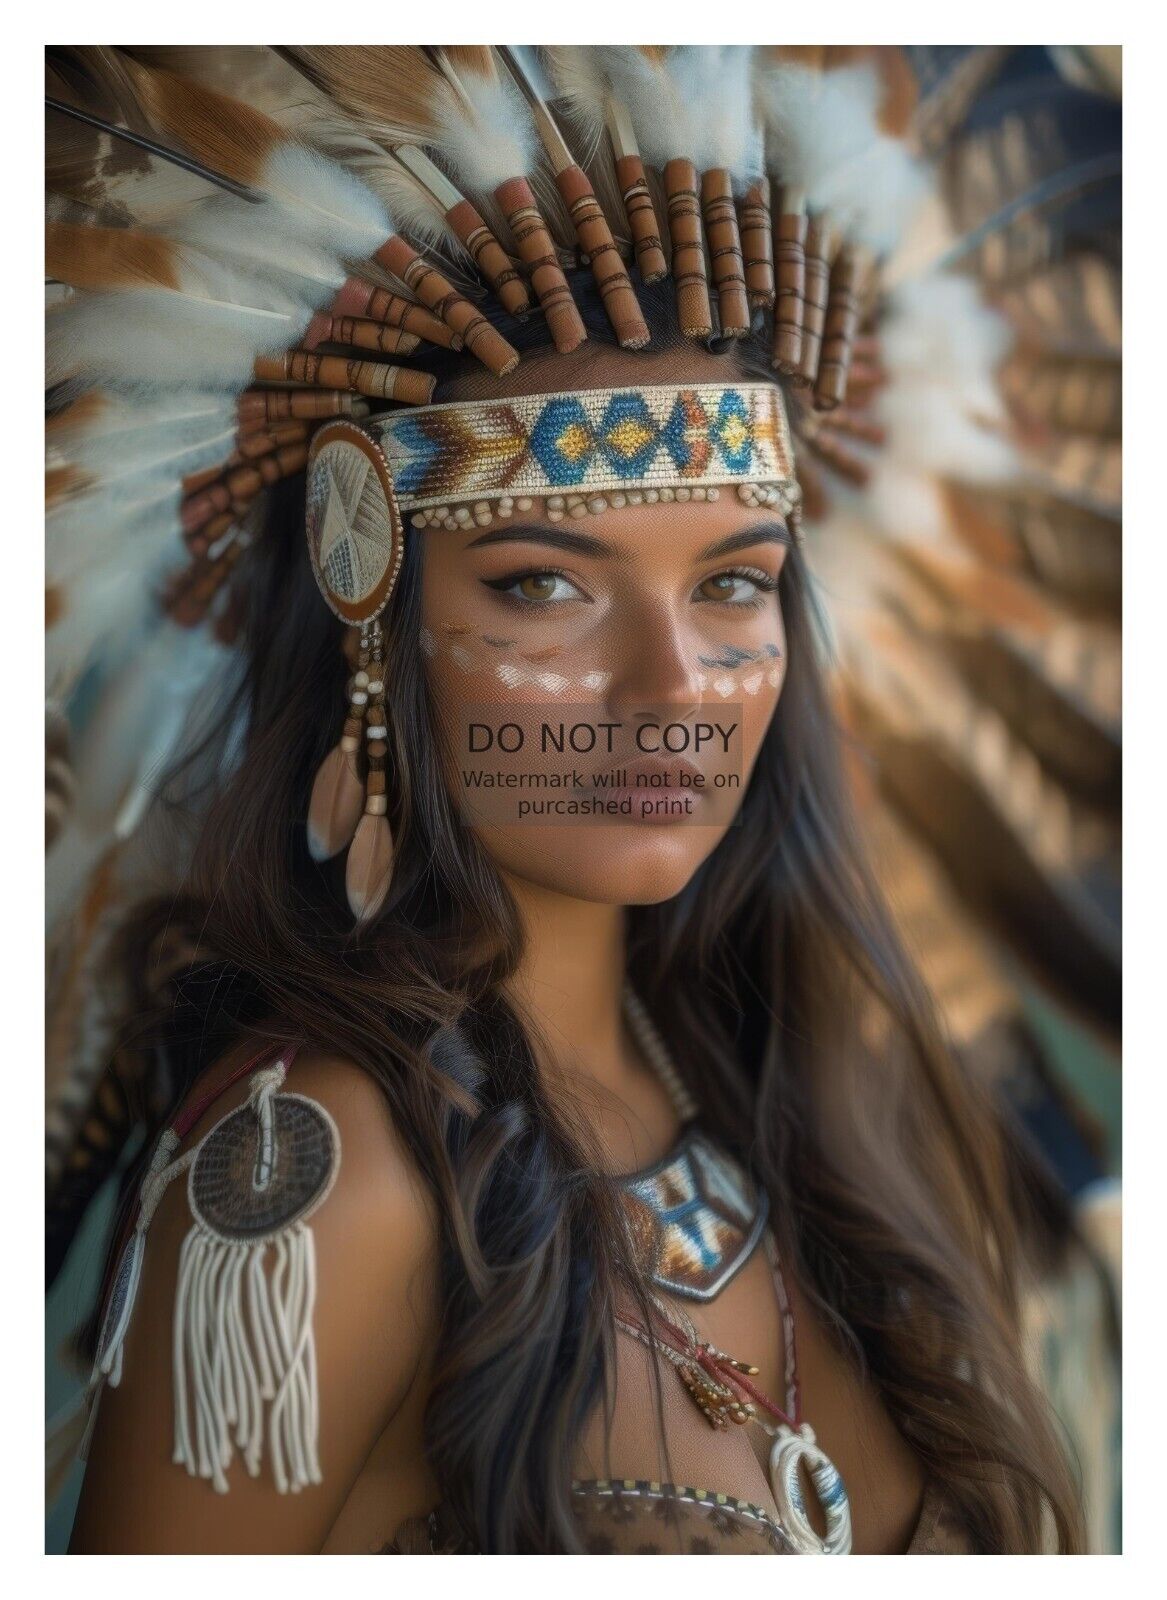 GORGEOUS YOUNG SEXY NATIVE AMEIRCAN LADY WEARING HEADRESS 5X7 FANTASY PHOTO